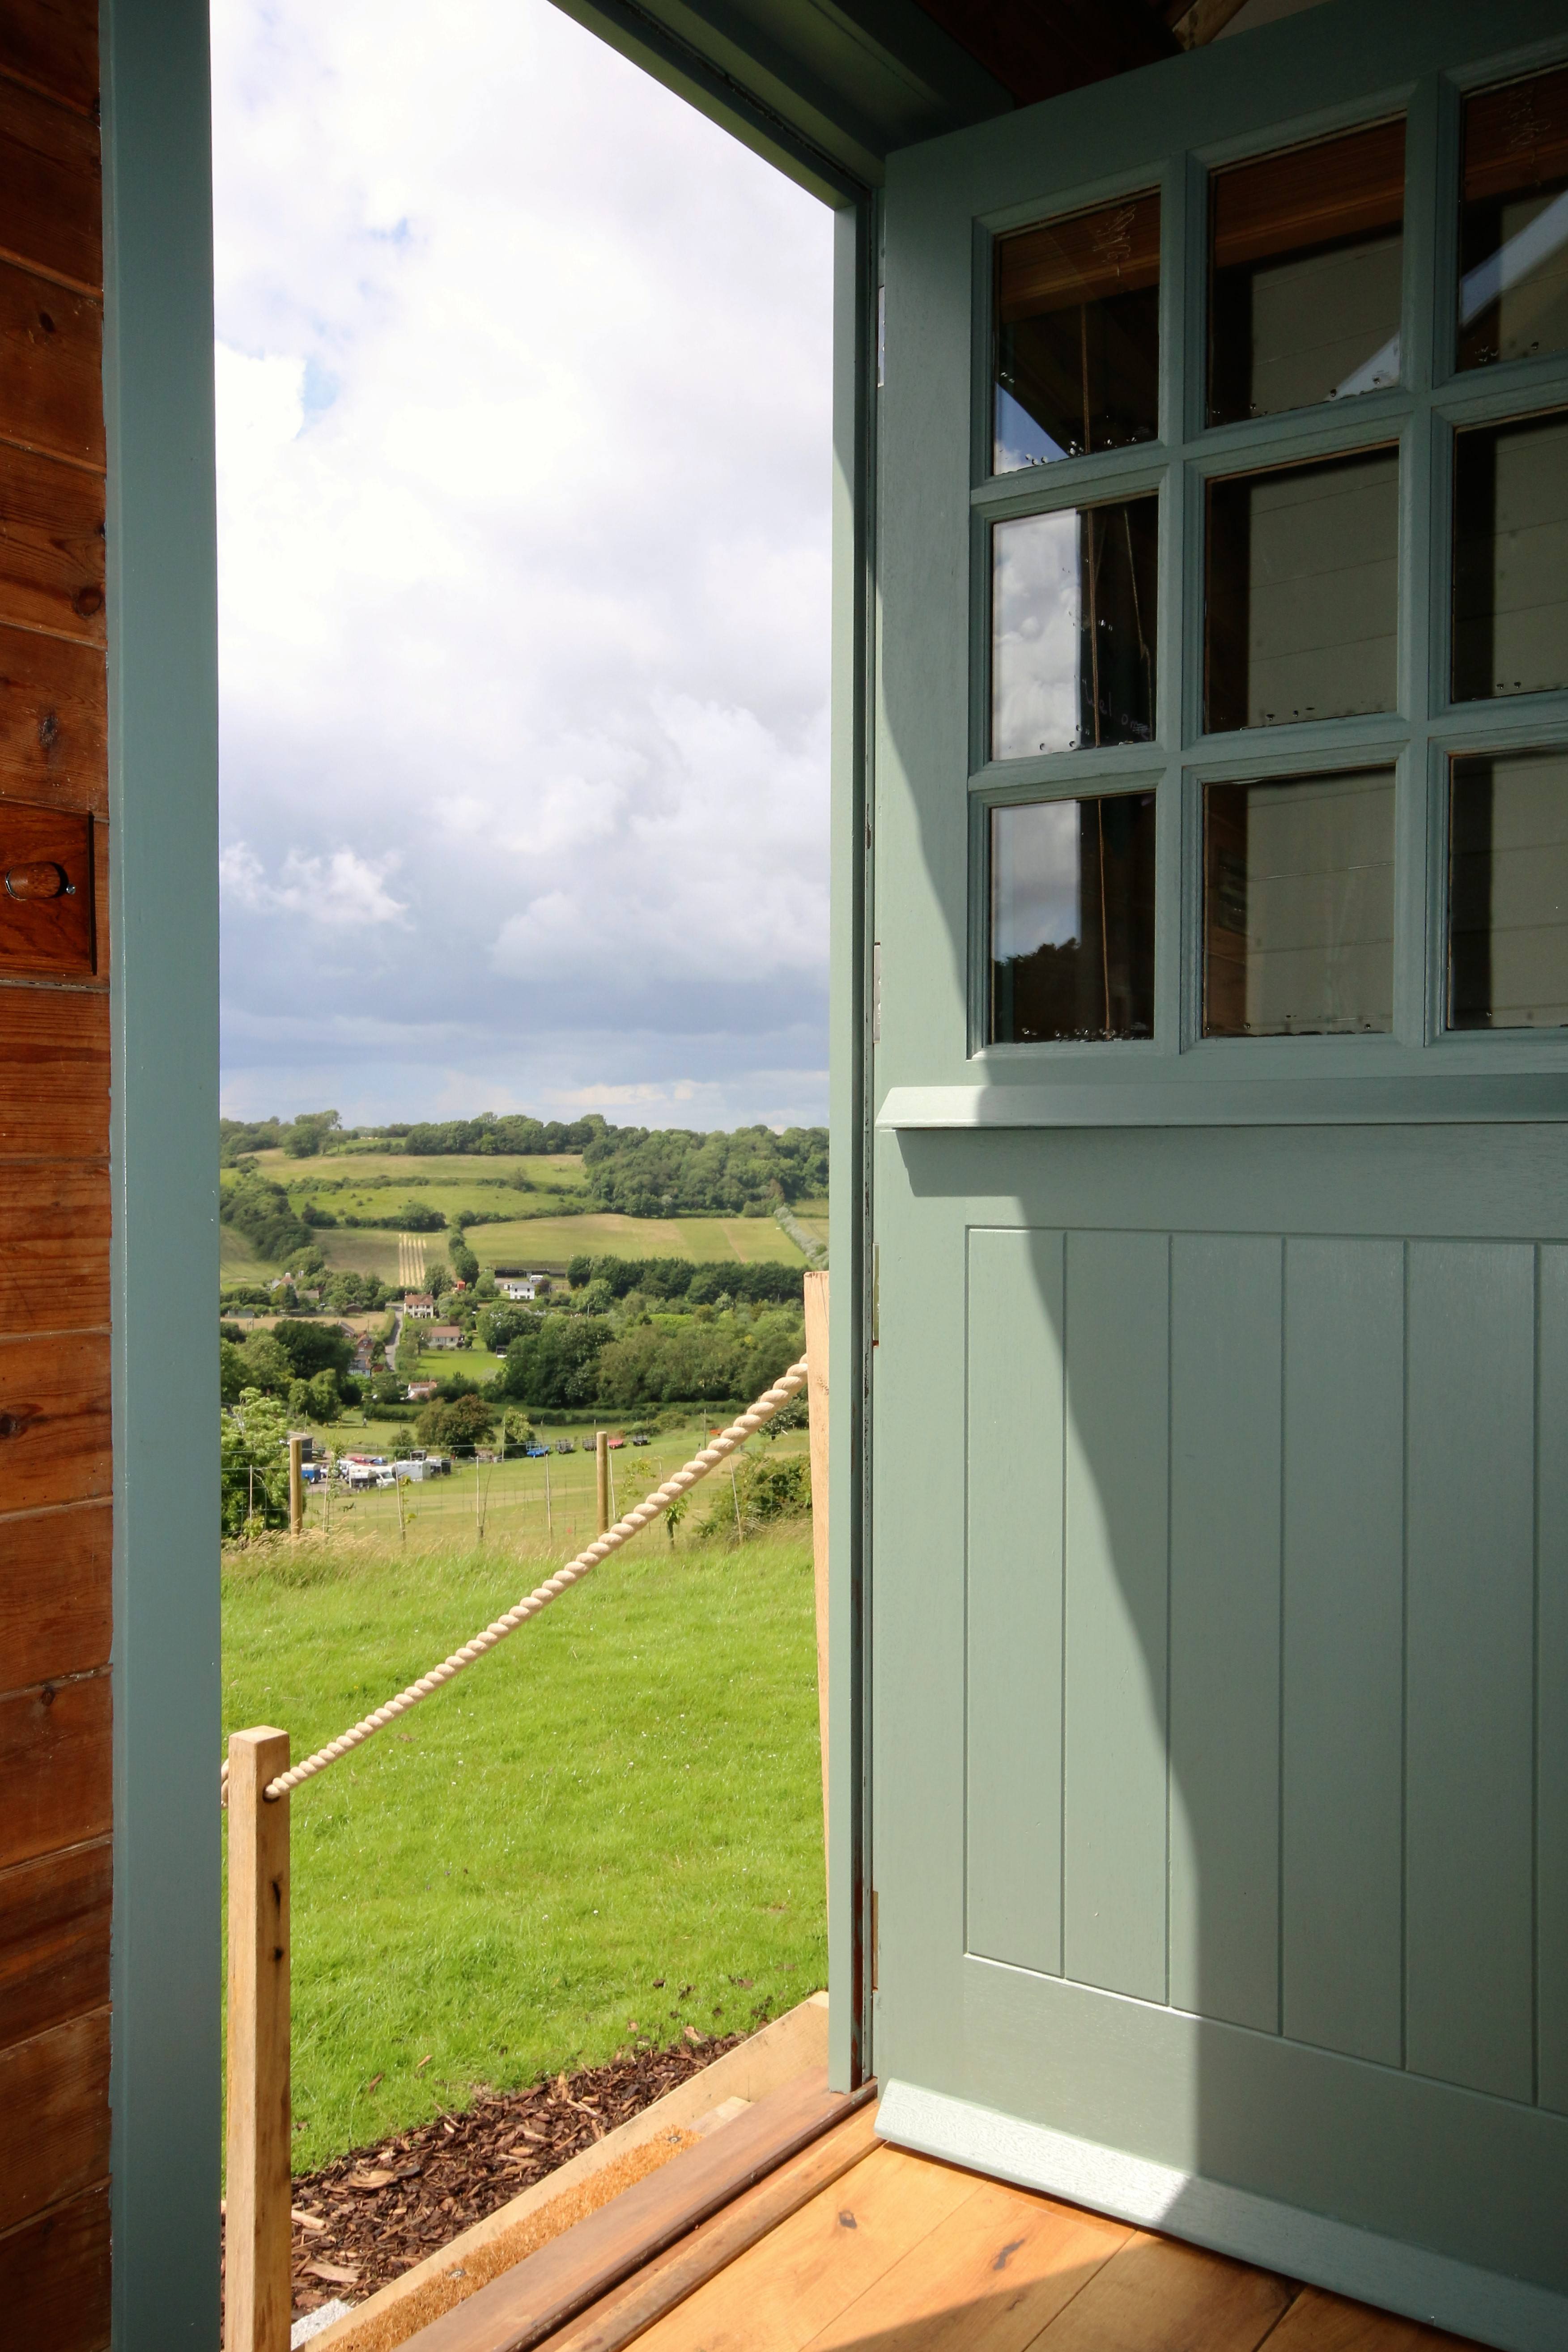 Shepherds hut views to the outside